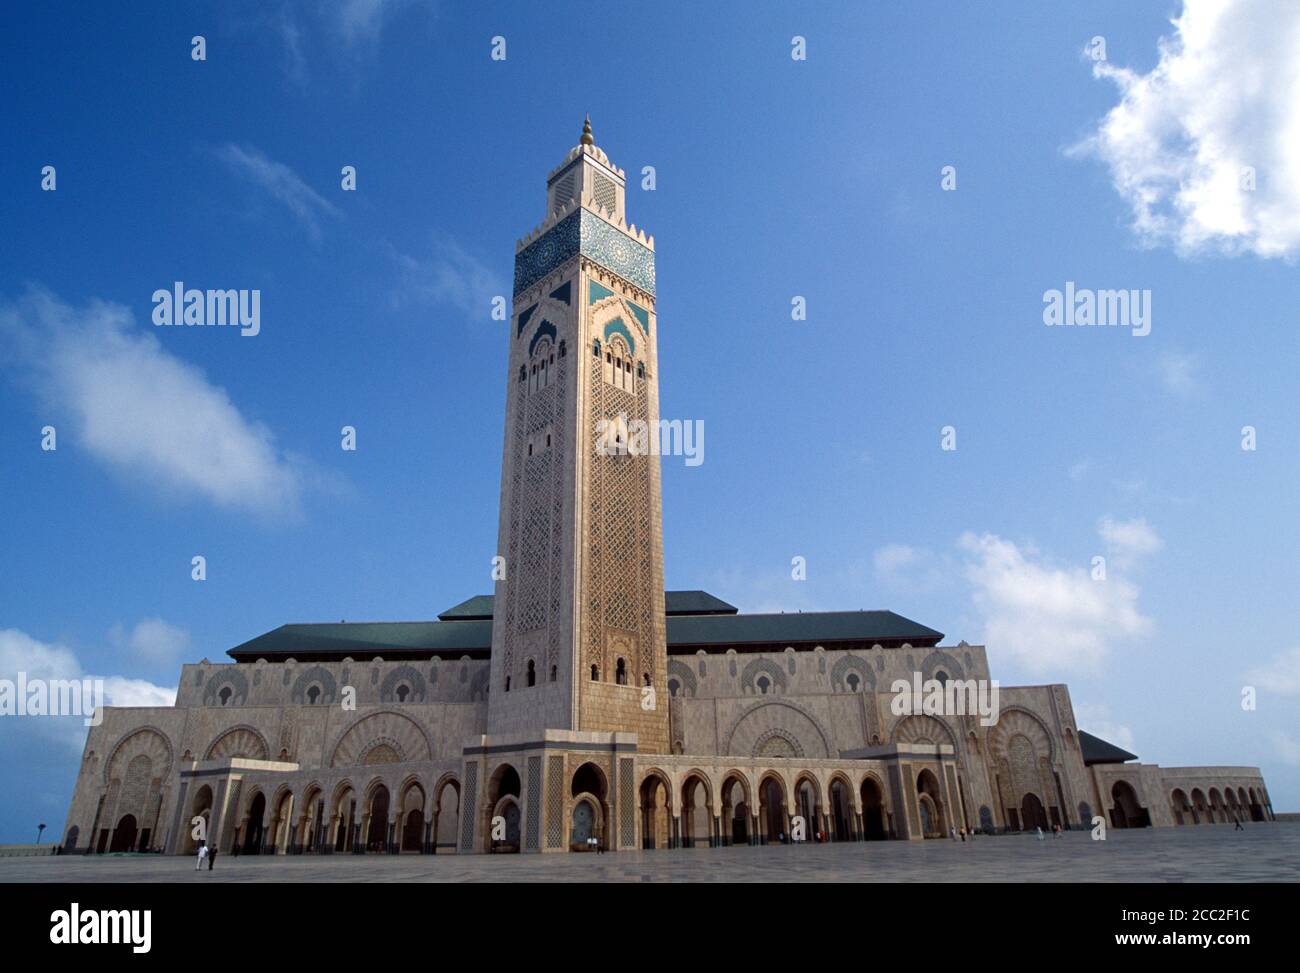 Hassan II mosque is the largest in Morocco and has the tallest minaret in the world. Stock Photo